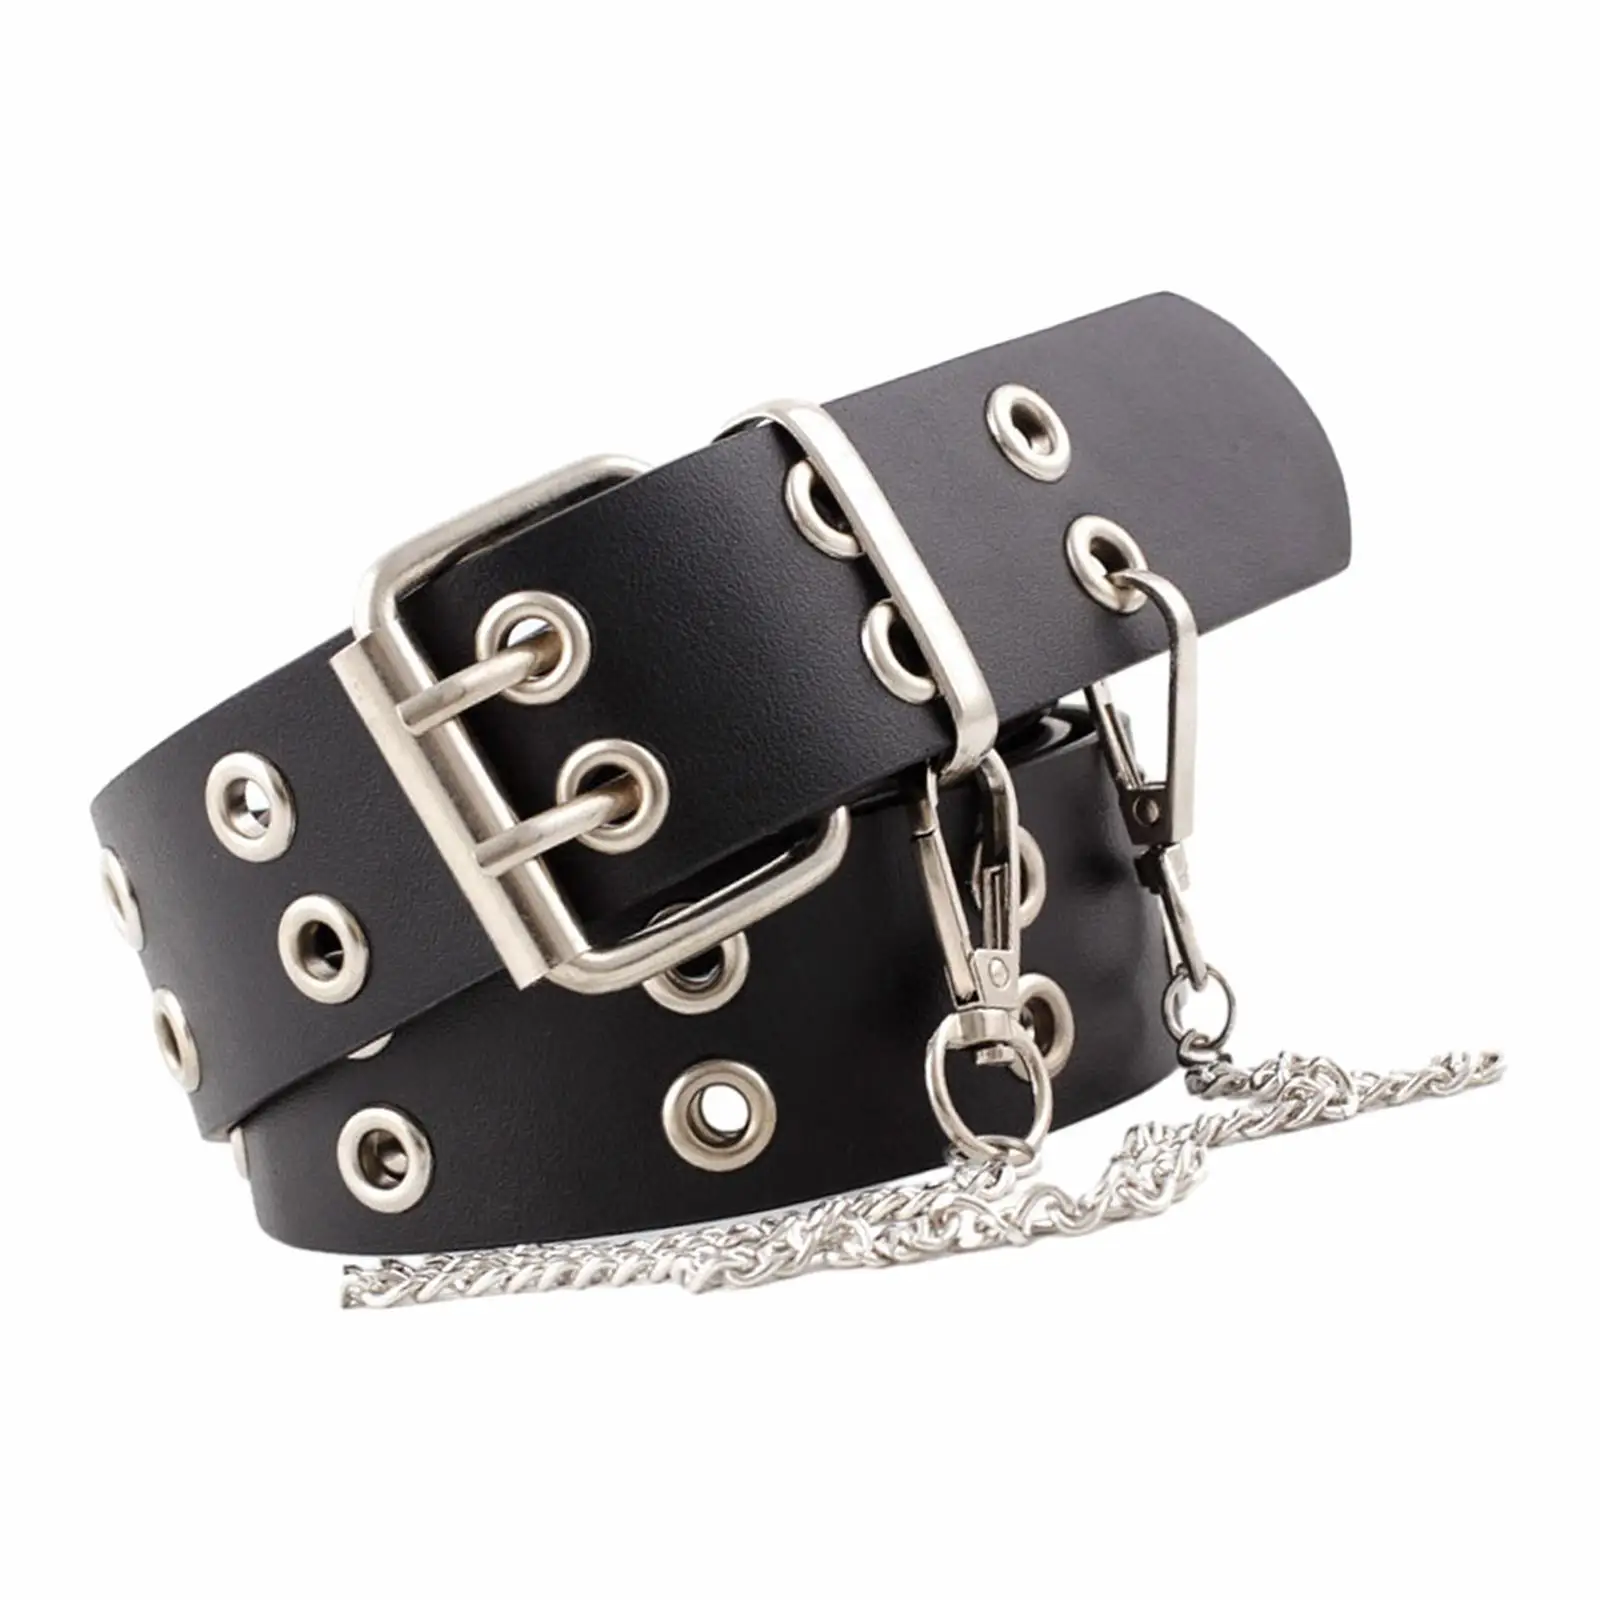 Double Grommet Belt with Chain PU Leather Rock Adjustable with 2 Holes Eyelet Gothic Punk Belt for Club Jeans Cosplay Women Men